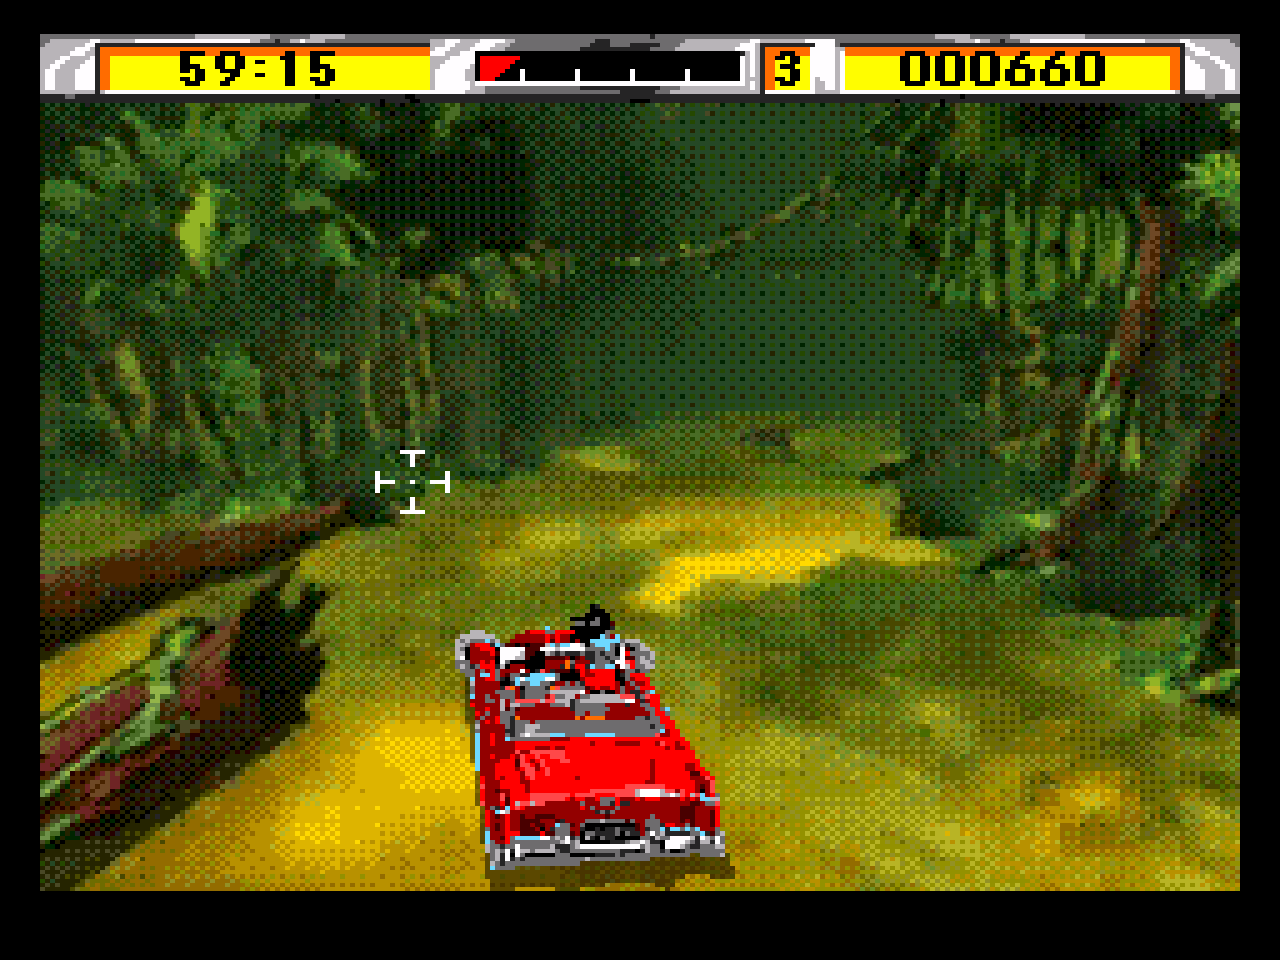 cadillacs and dinosaurs game download for android